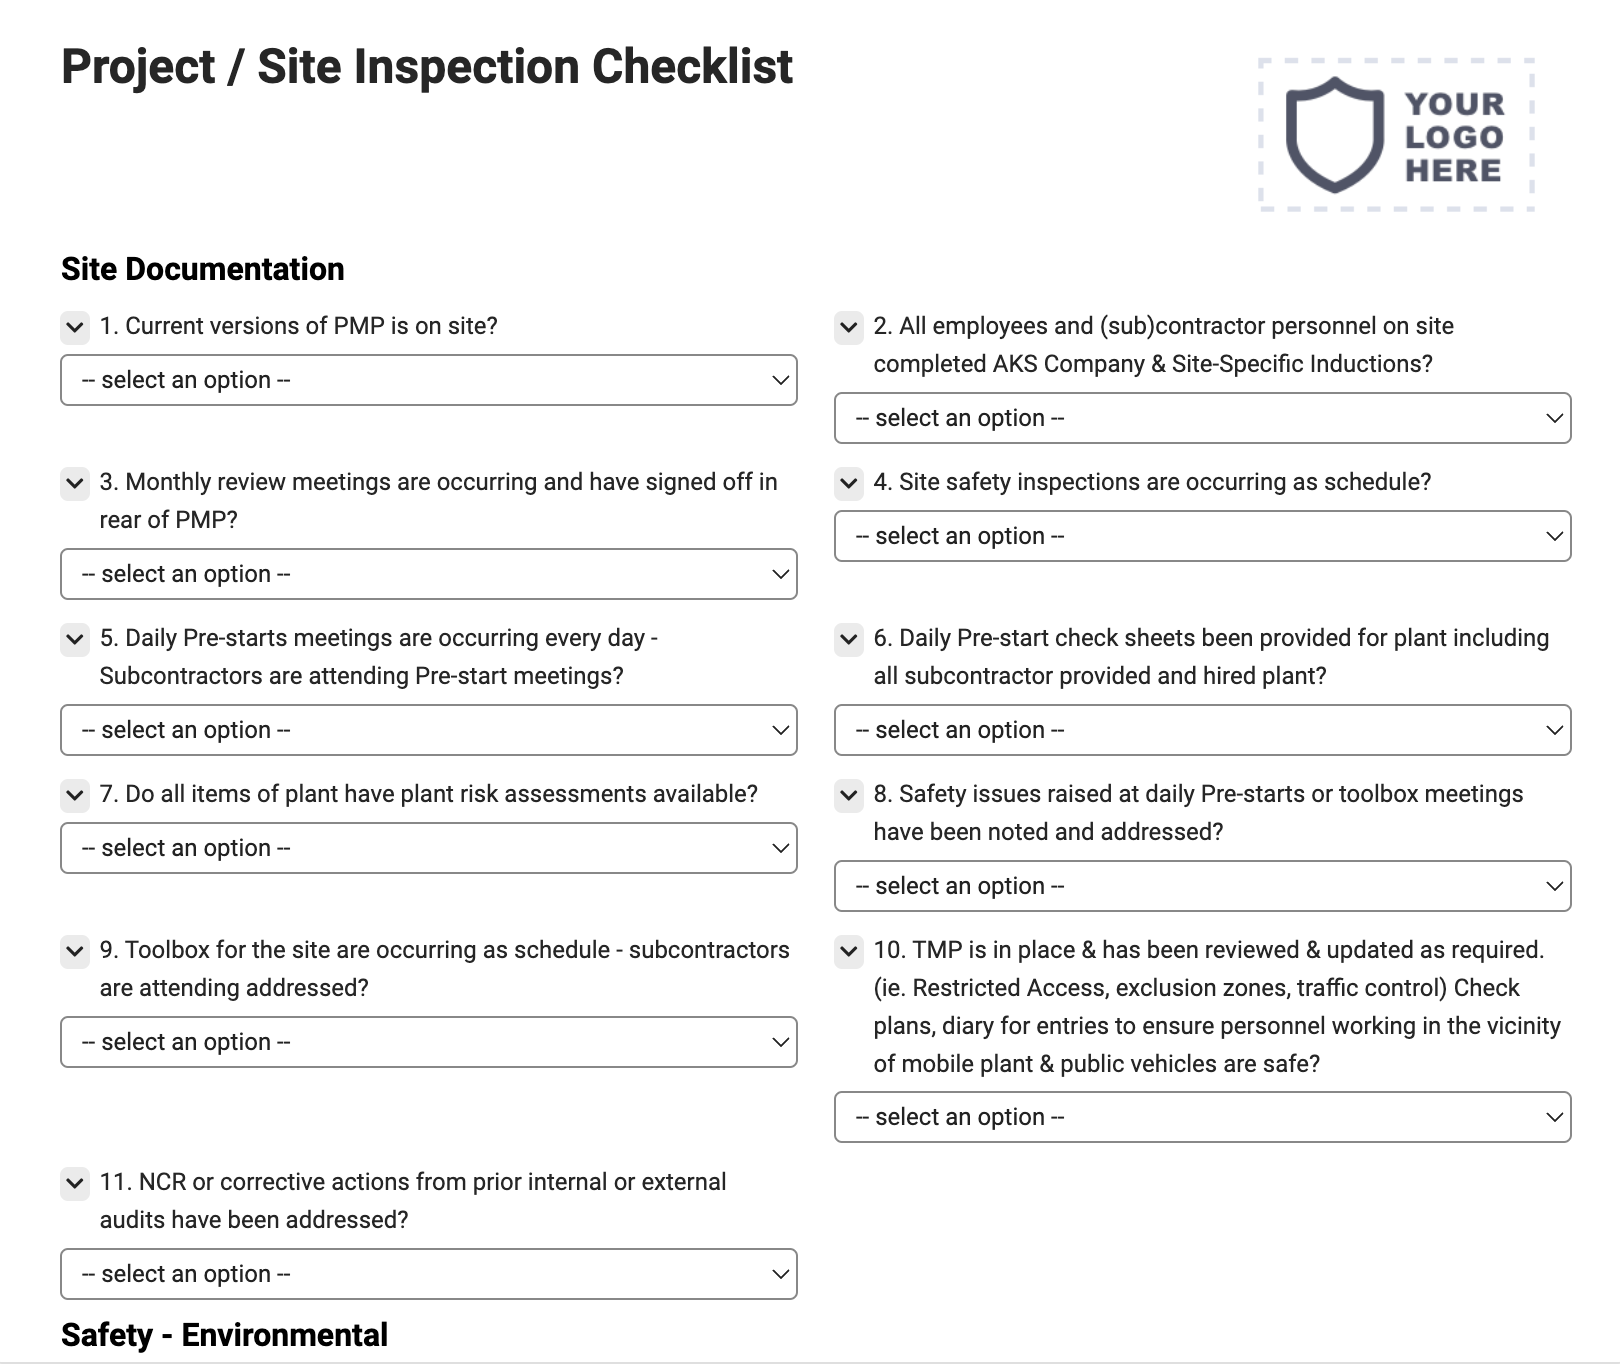 Project / Site Inspection Checklist